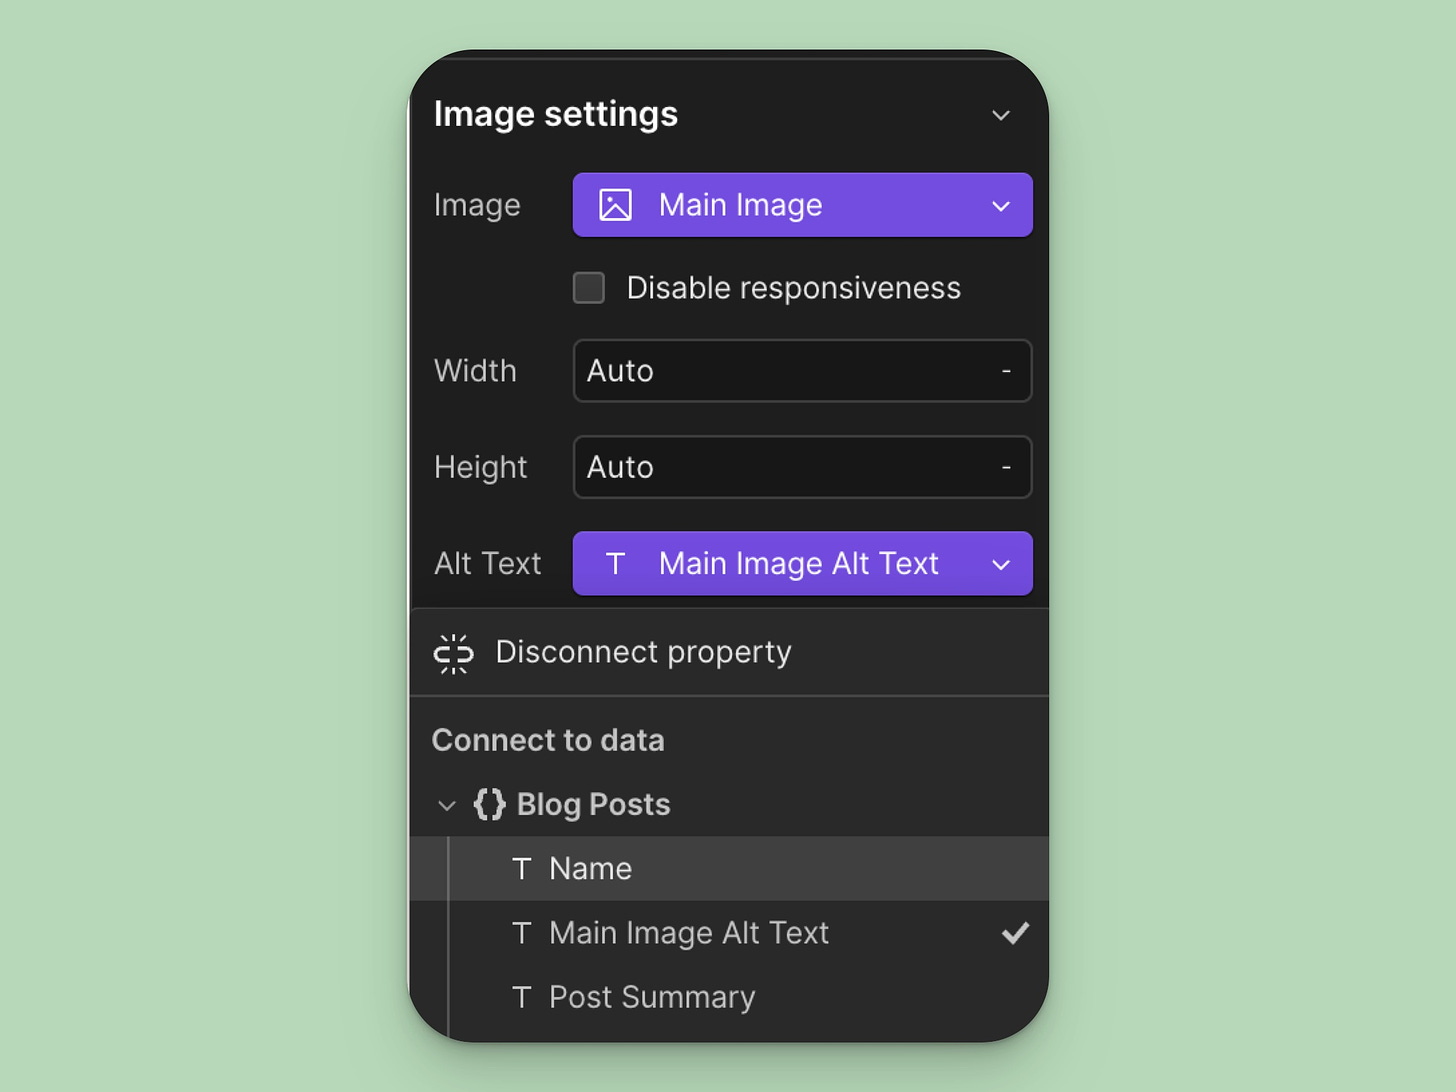 Connecting a custom field called Main Image Alt Text to the Alt Text field in Image settings.